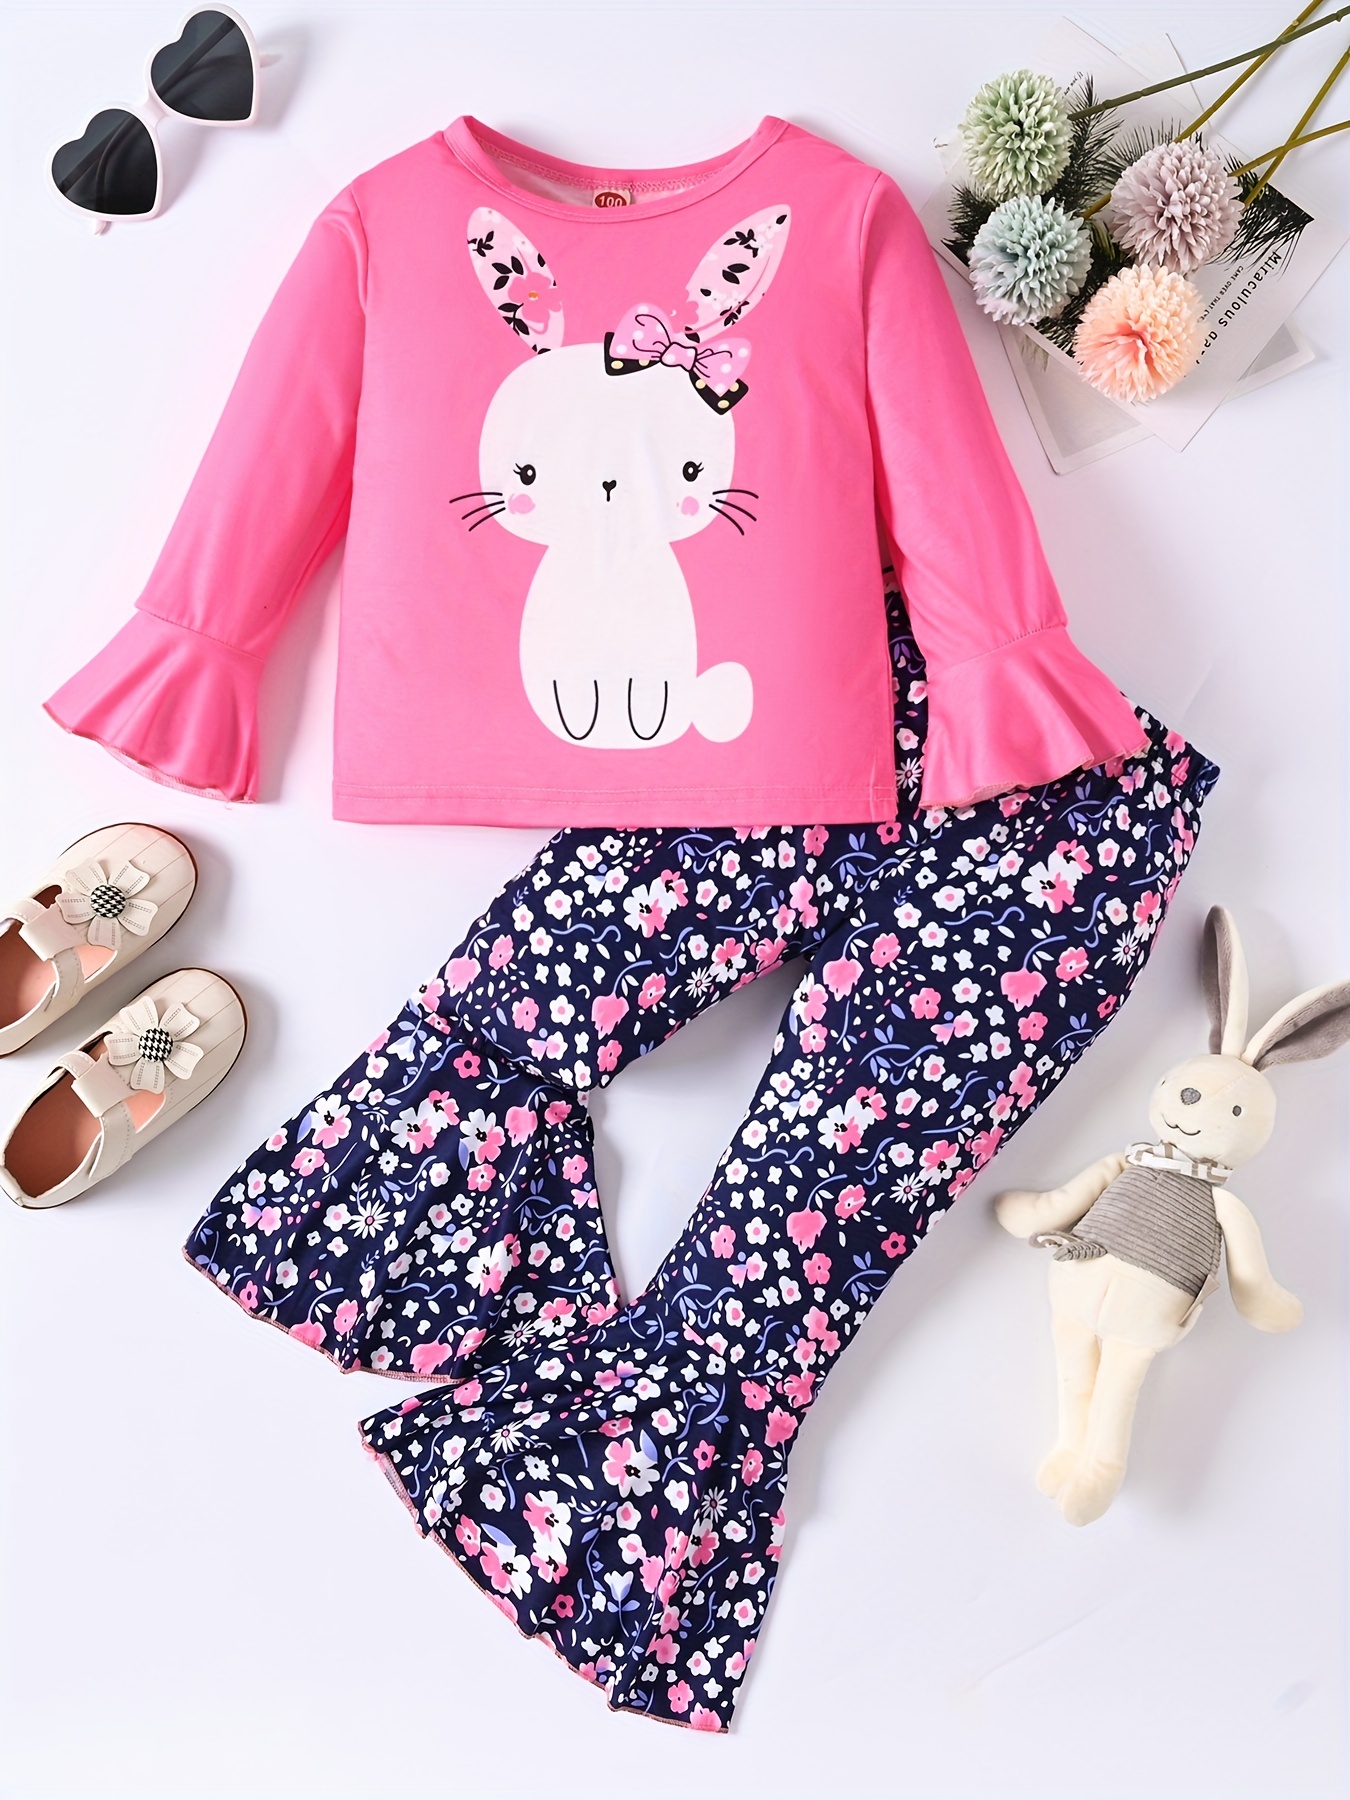 2pcs Toddler Girls' Cute Outfits, Bunny Print Top & Flora Flare Pants Set  Kids Clothes For Fall Party